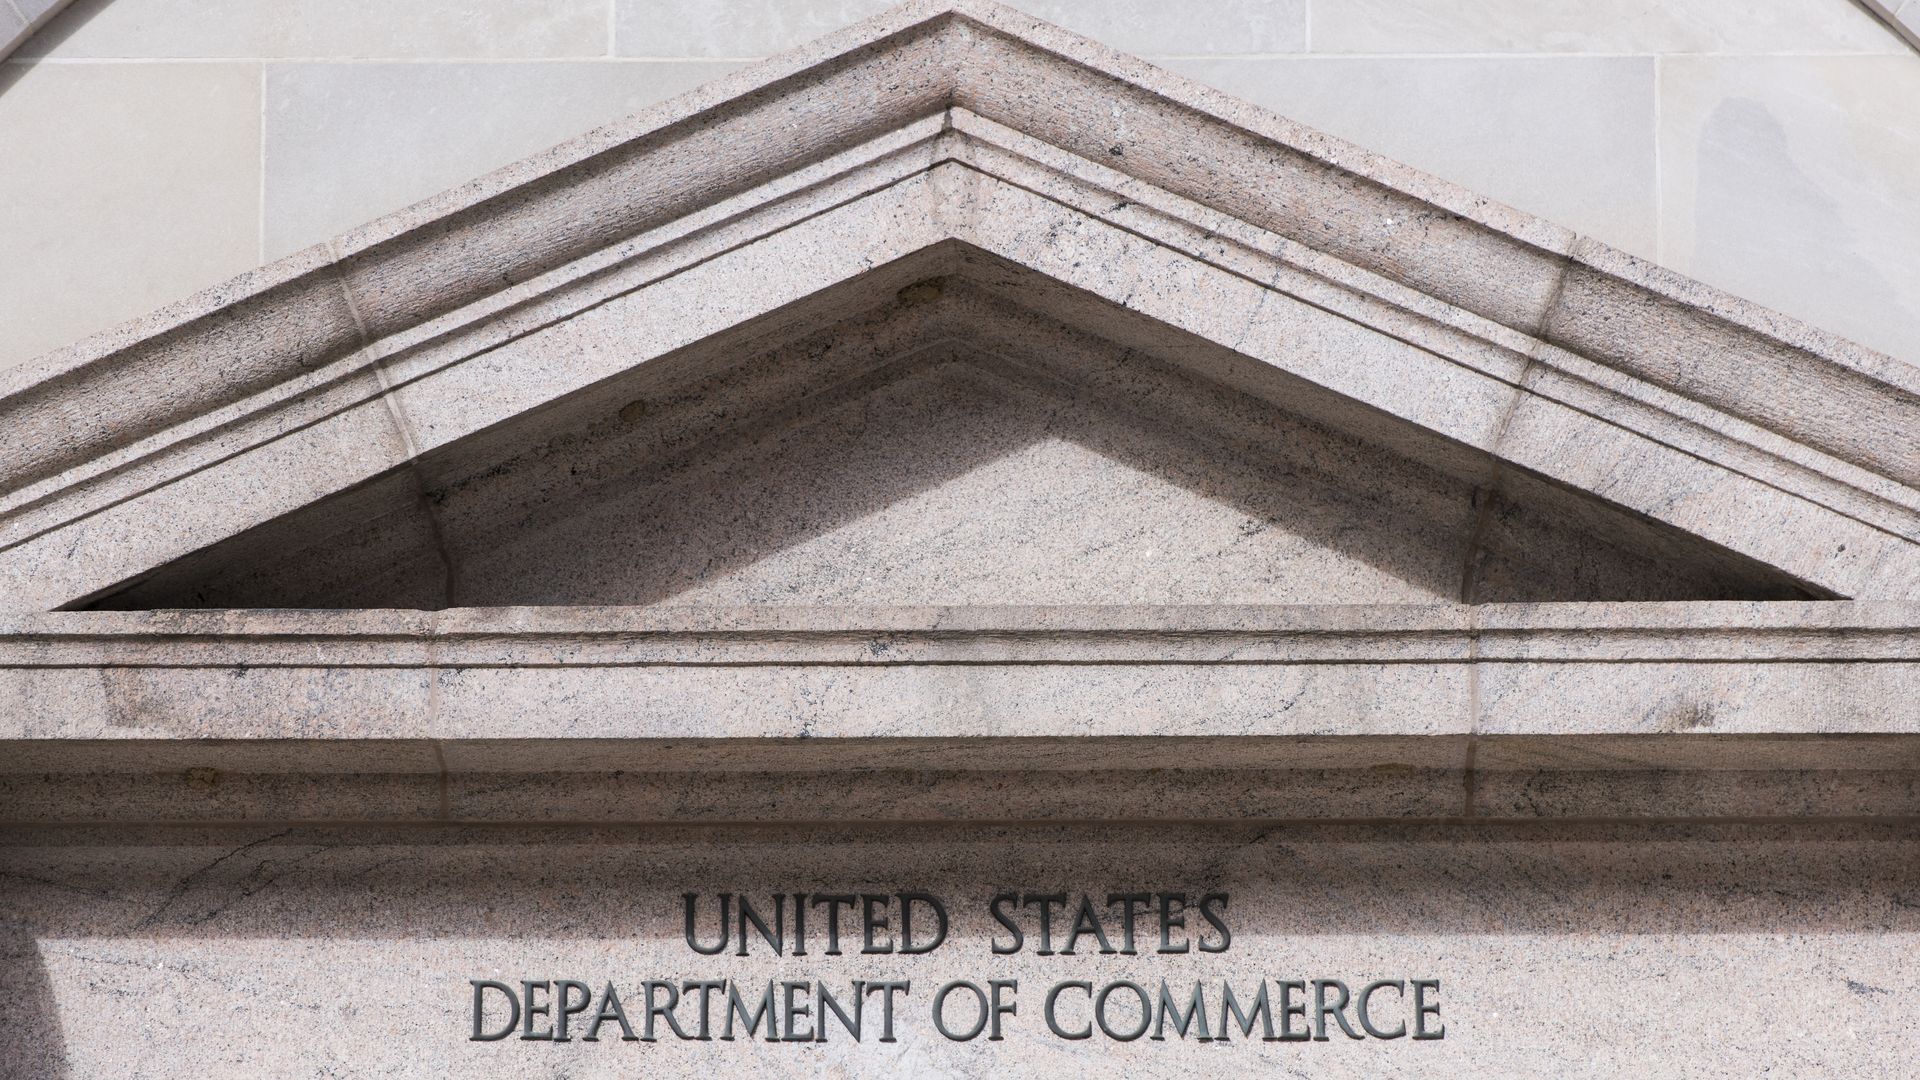 Entrance to U.S. Department of Commerce building in Washington, D.C.